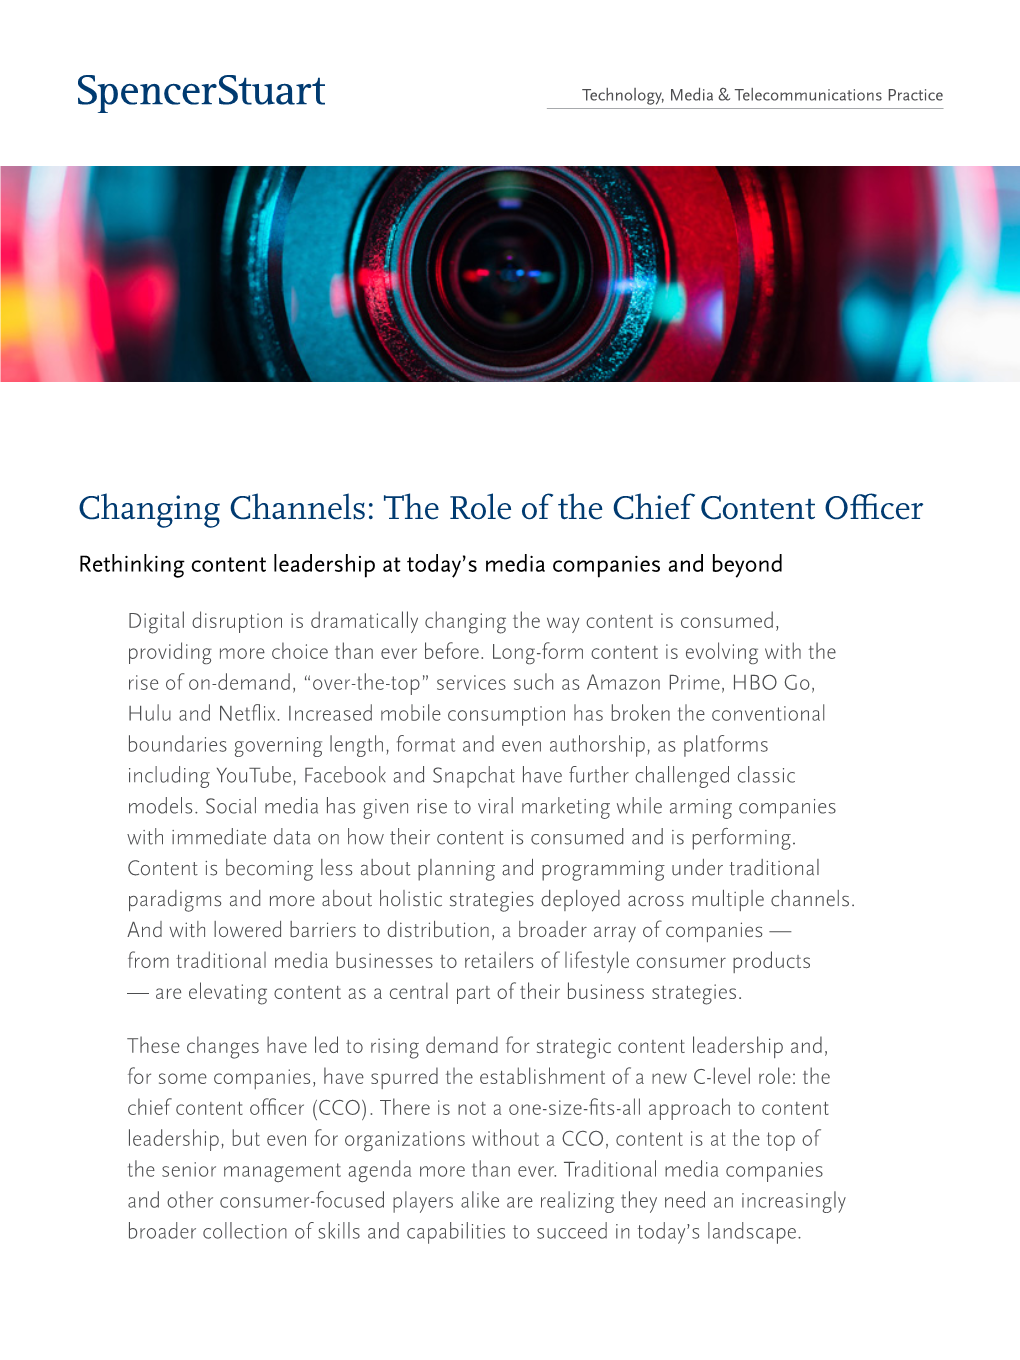 Changing Channels: the Role of the Chief Content Officer